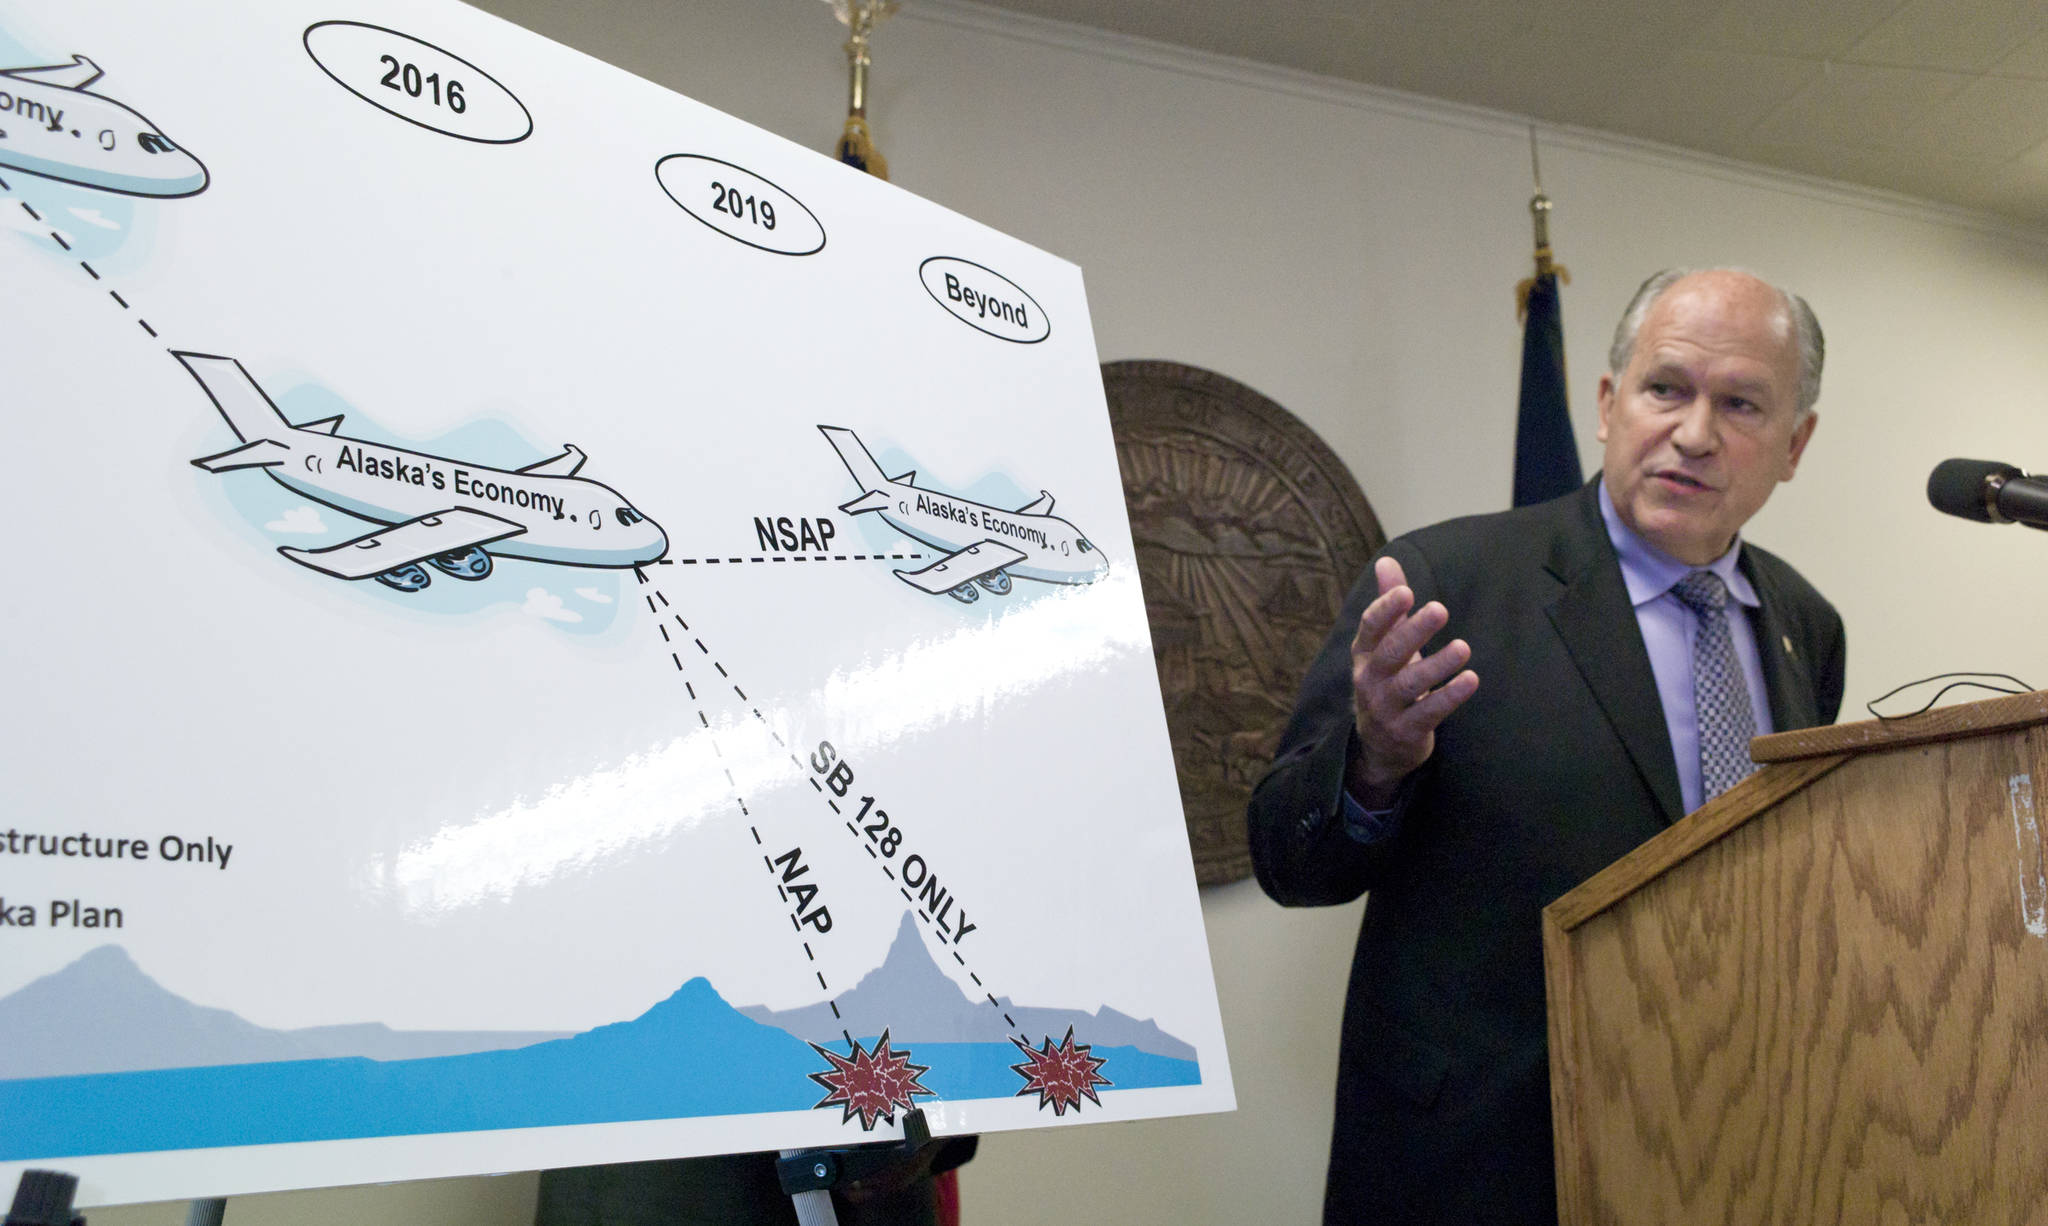 In this July 14, 2016 photo, Gov. Bill Walker points to a chart during a press conference that uses a crashing jet to show possible scenarios for Alaska economy if the legislature fails to act during its special session. (Michael Penn | Juneau Empire File)